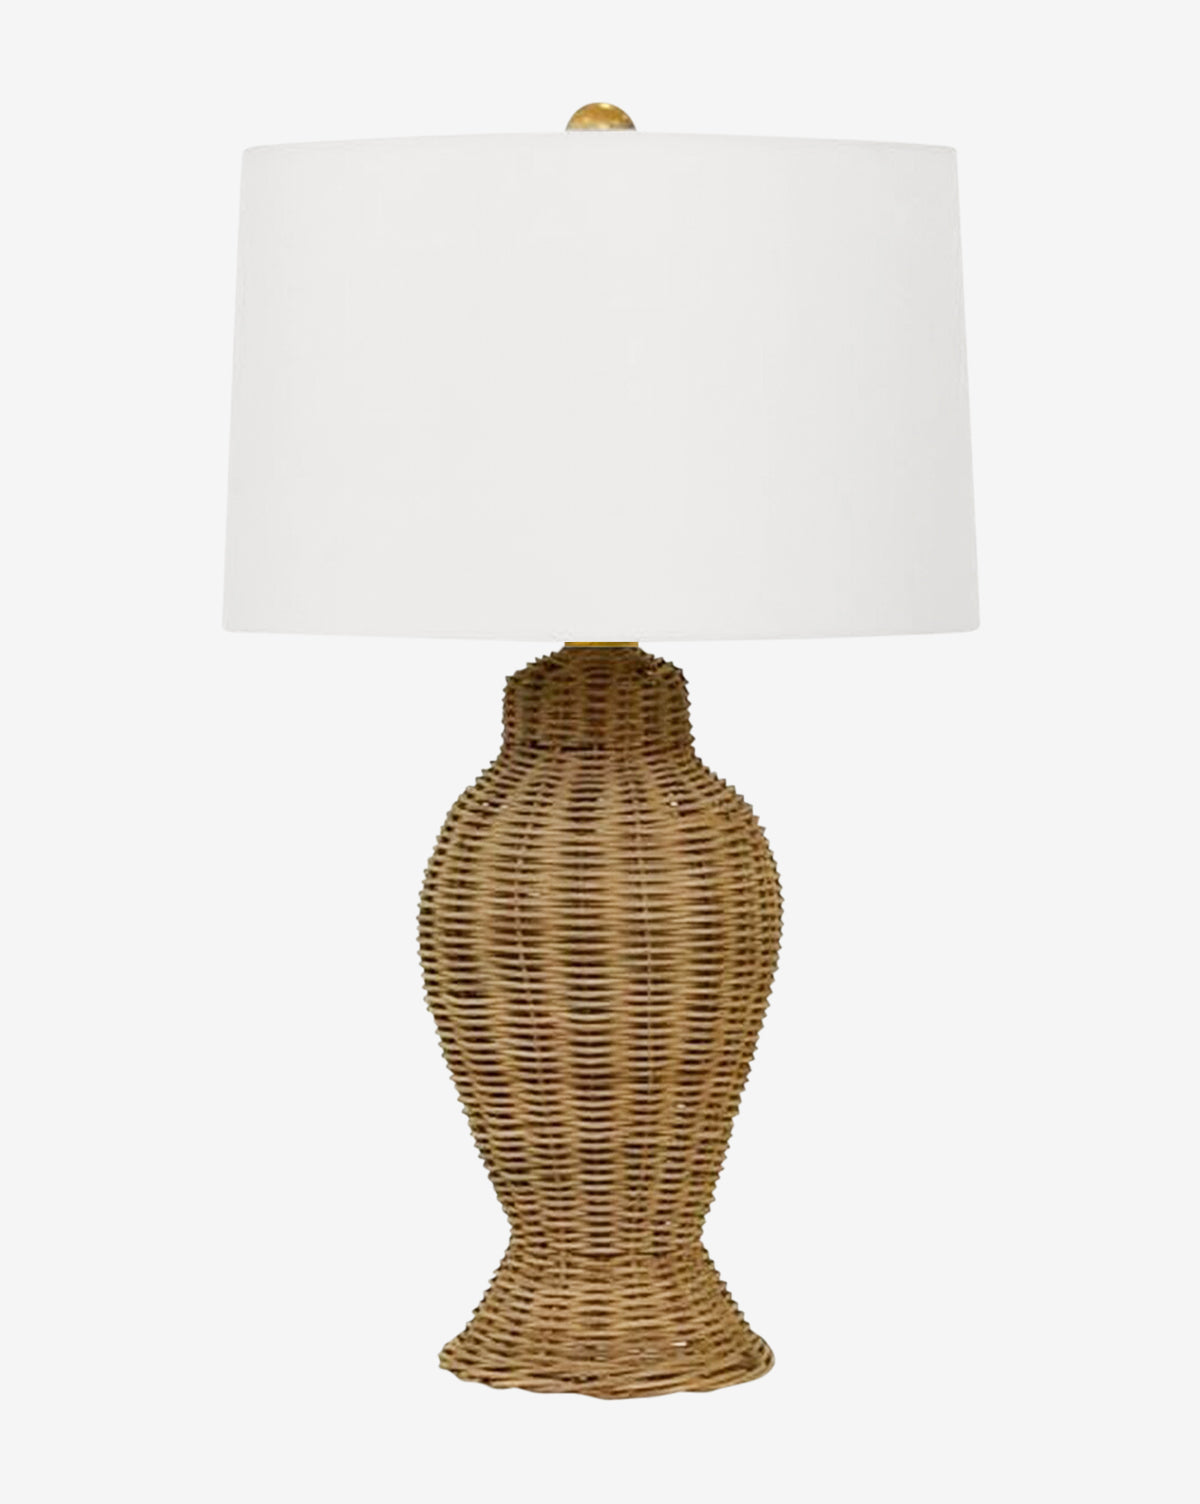 Worlds Away, Manolo Table Lamp